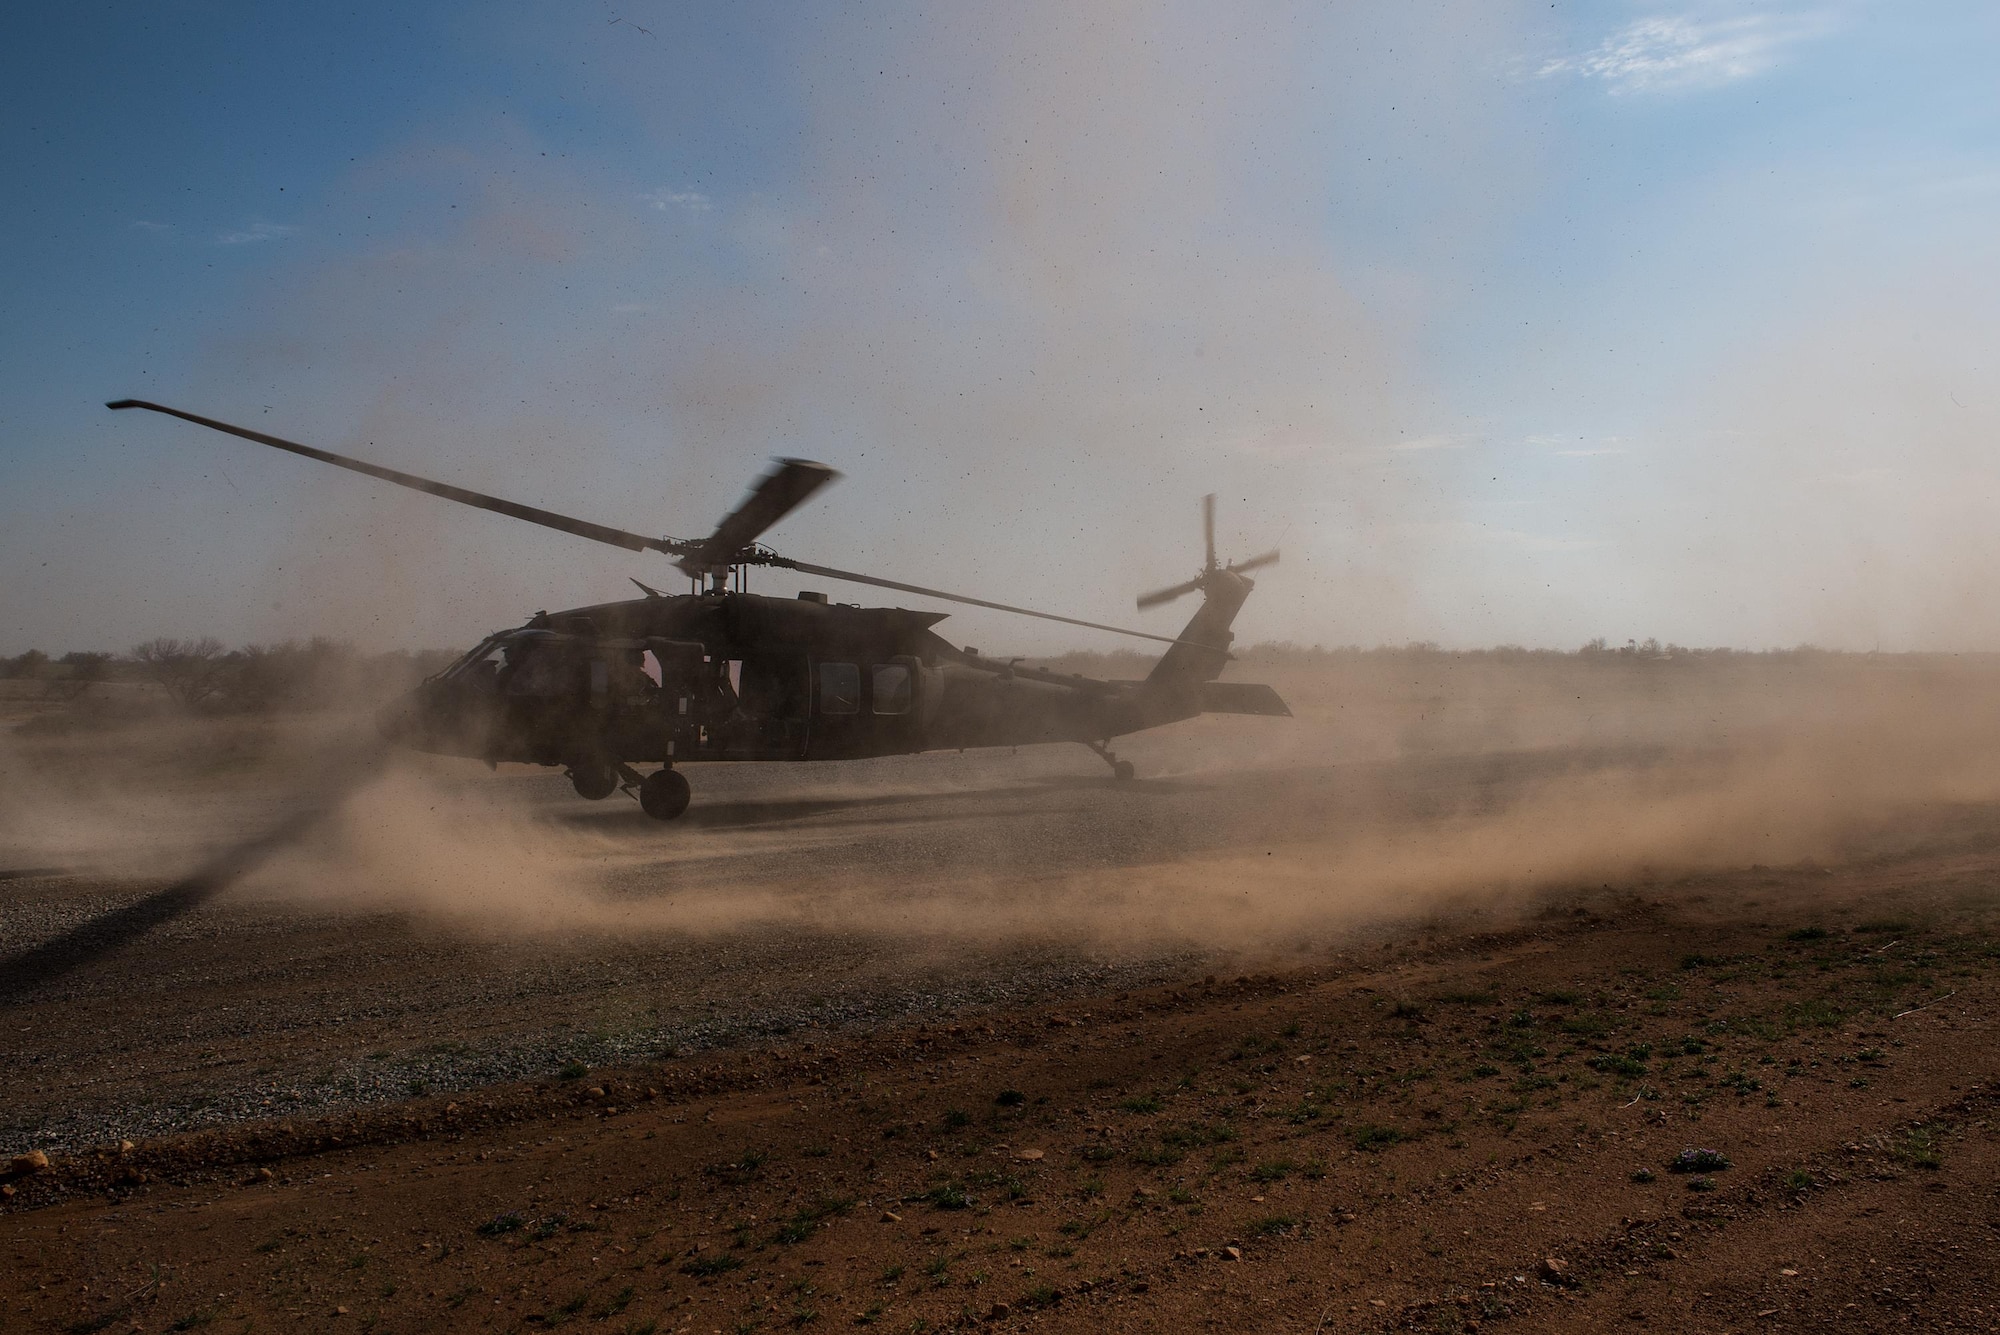 A UH-60 Black Hawk helicopter prepares to land and extract Special Tactics Airmen for the 123rd Special Tactics Squadron, Kentucky Air National Guard, and one Public Affairs Airman from Falcon Bombing Range, Fort Sill, Okla., March 22, 2017. The 137th Air Support Element from the 137th Special Operations Wing, Oklahoma City, coordinated a joint training event with the 123rd Special Tactics Squadron, Kentucky Air National Guard, Air Force Reserve F-16 Fighting Falcons from the 301st Fighter Wing and T-38 Talons from the 88th Fighter Training Squadron, Sheppard Air Force Base, March 20-23, 2017. (U.S. Air National Guard photo by Senior Master Sgt. Andrew M. LaMoreaux/Released)